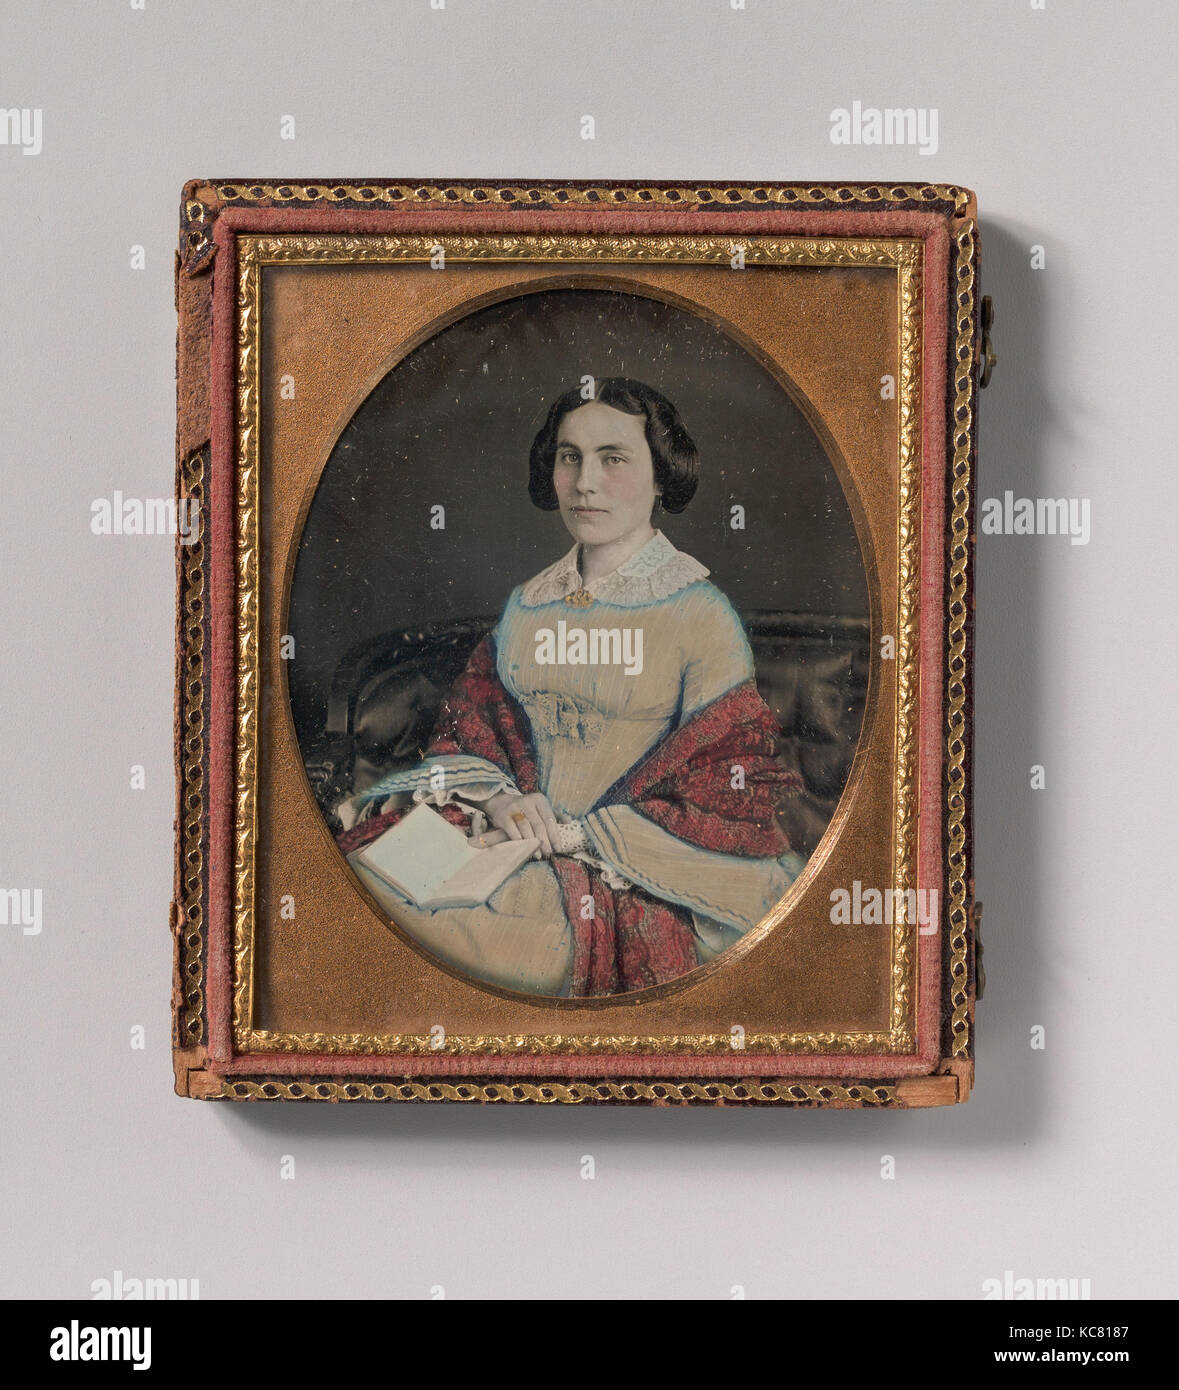 Seated Young Woman Wearing a Shawl, Holding an Open Book in her Lap, Unknown, 1850s Stock Photo